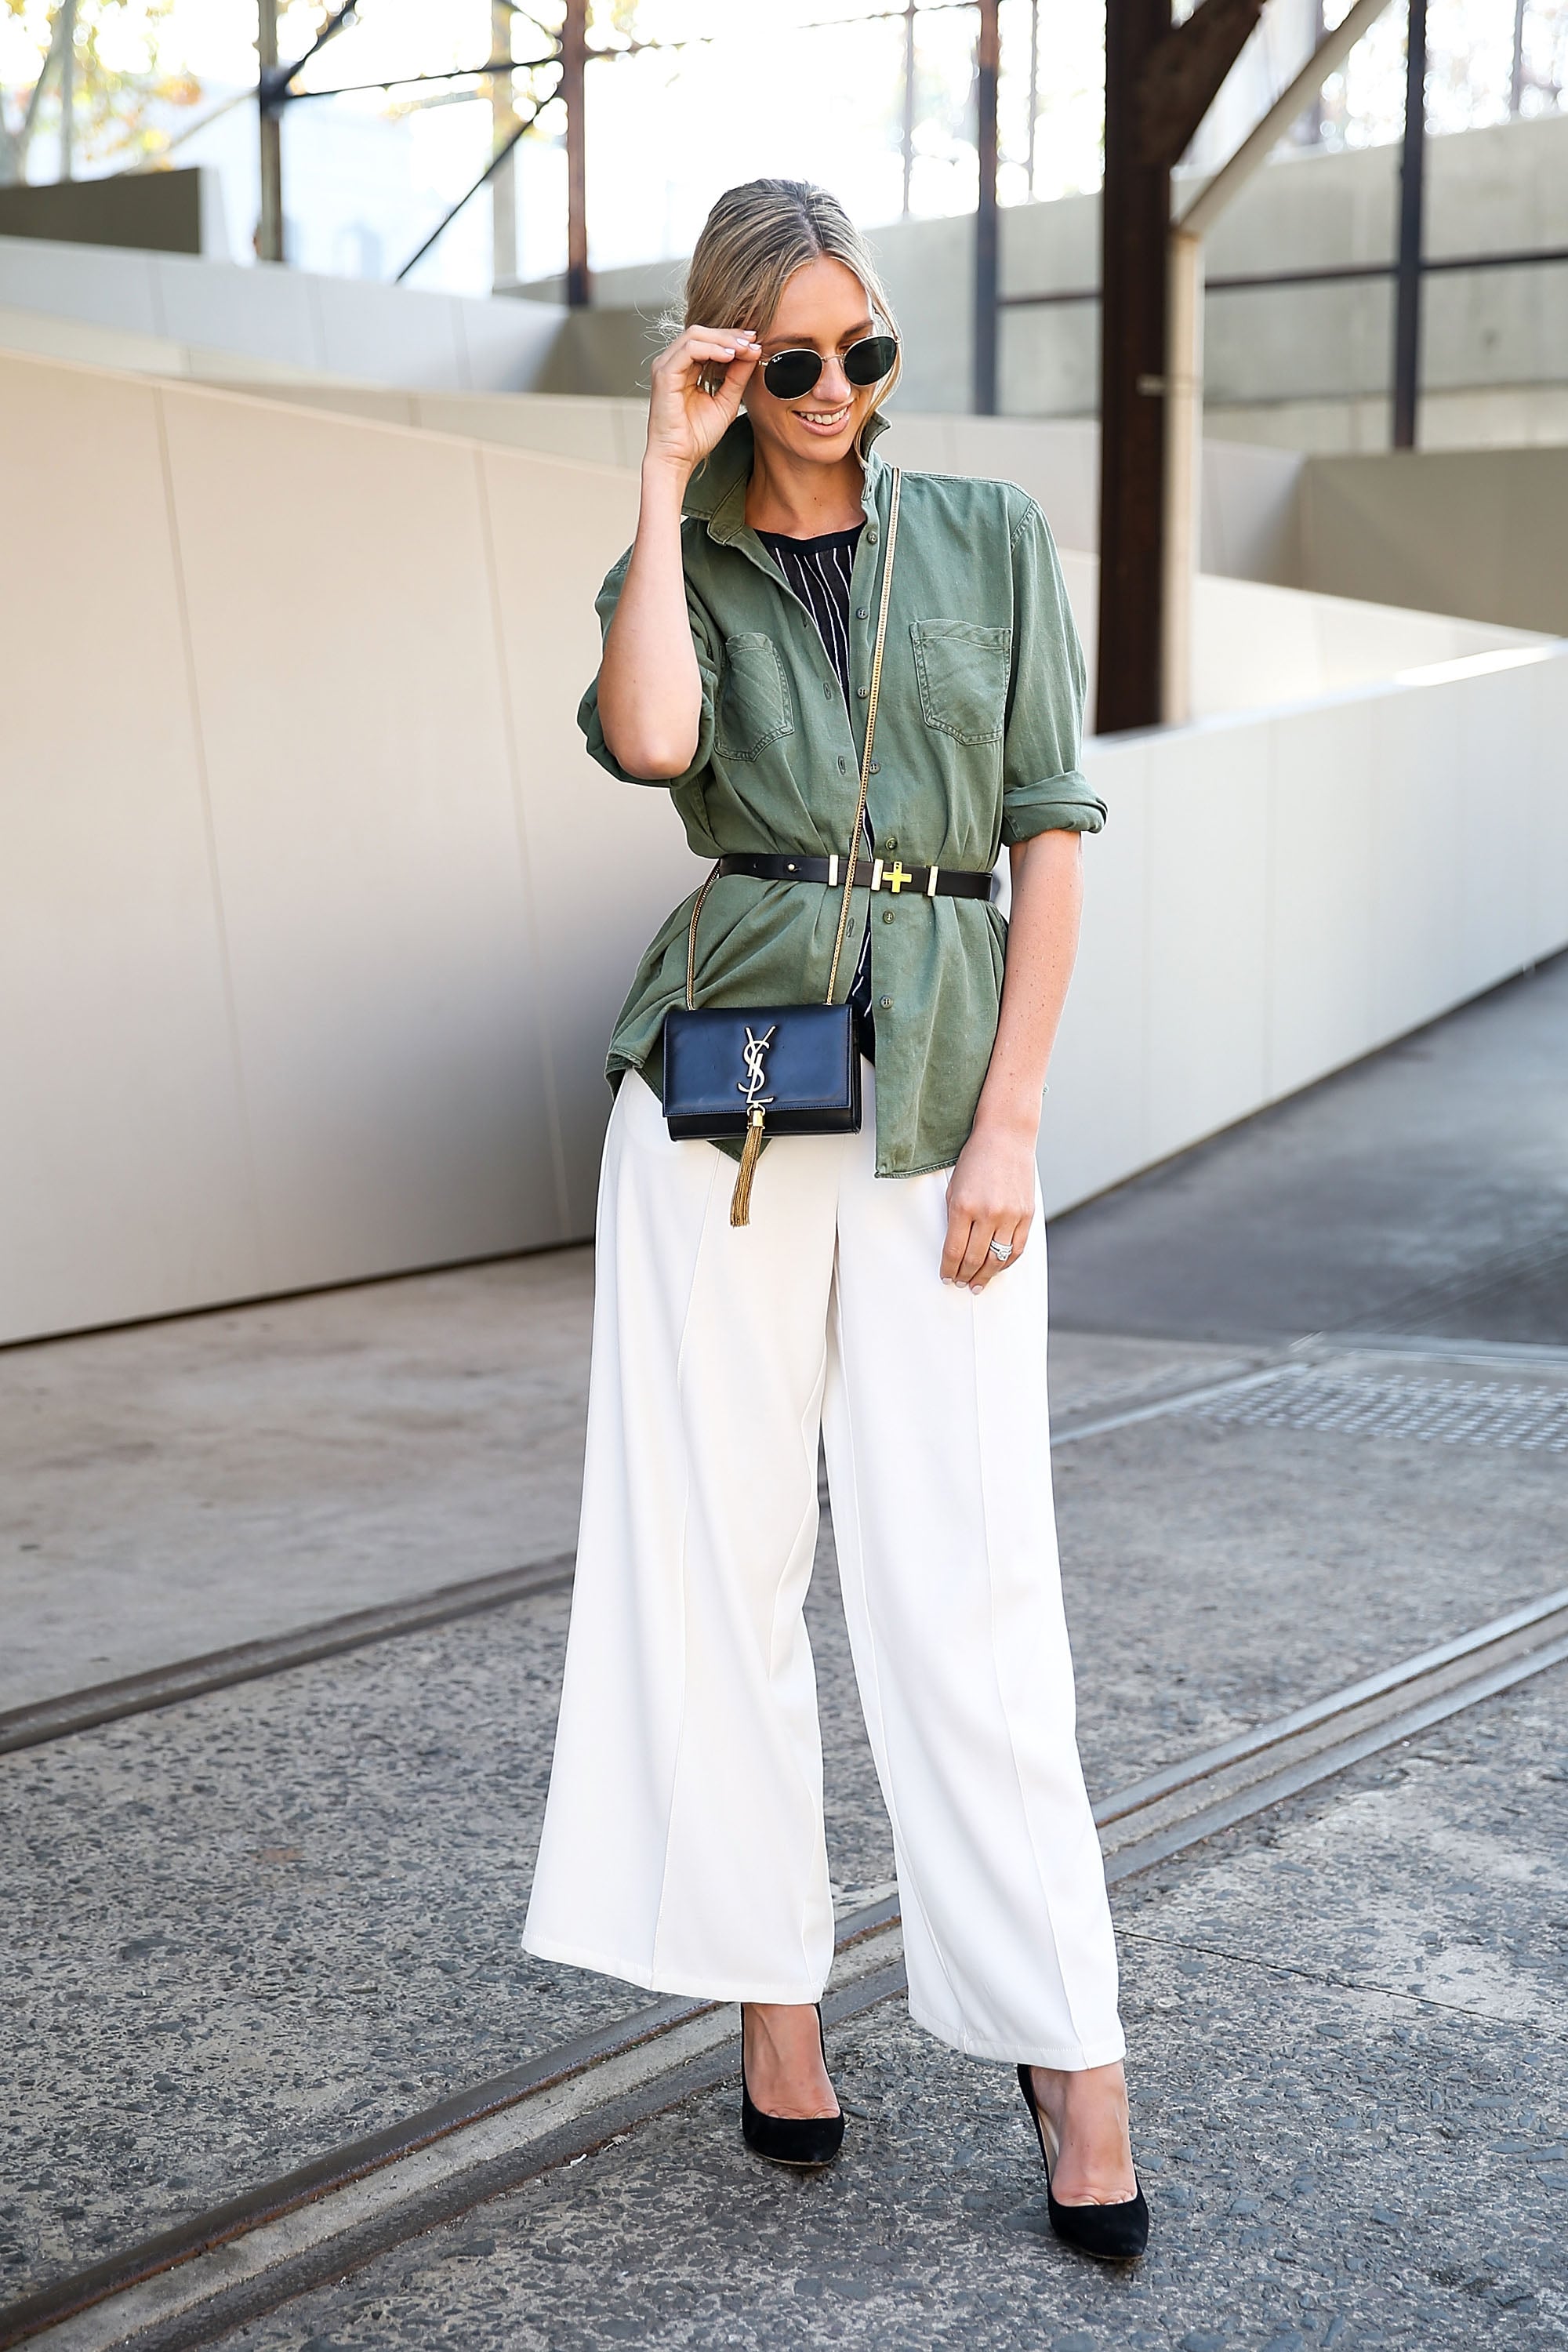 Suede Pants Warm Weather Outfits For Women In Their 30s (2 ideas & outfits)